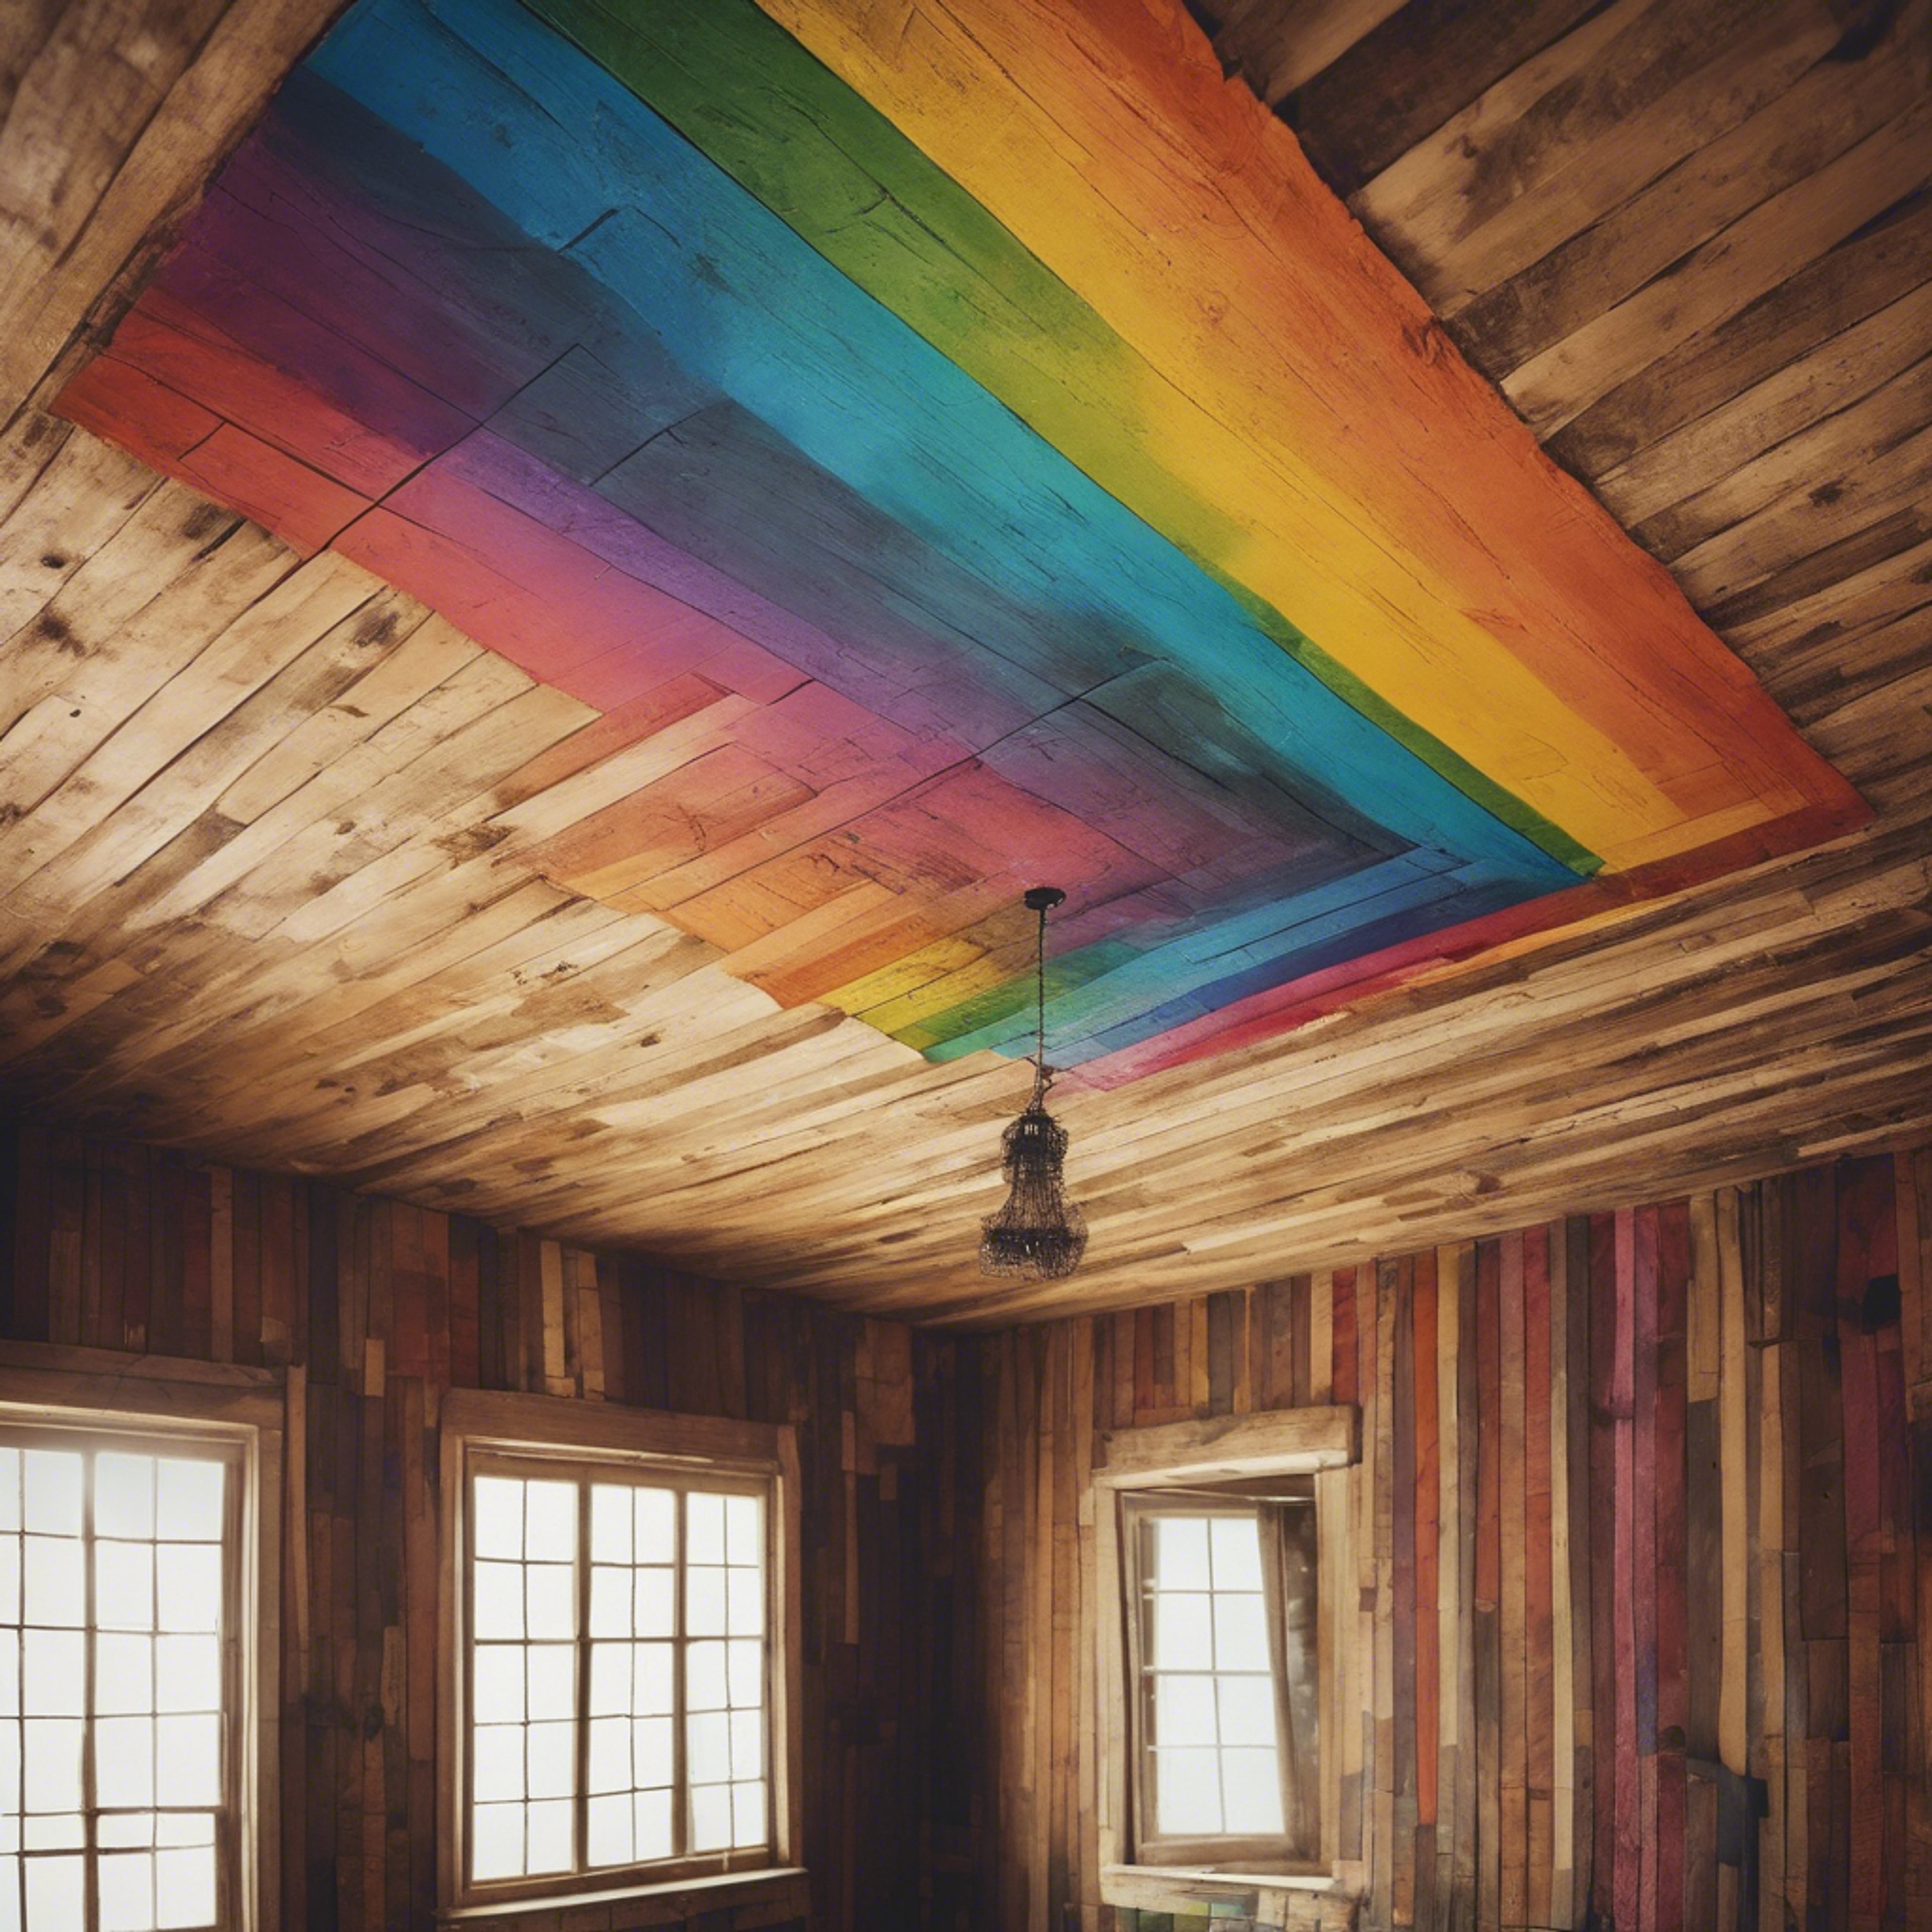 A boho rainbow painted on the ceiling of a wooden vintage room.壁紙[cafb581964c64a849ff2]